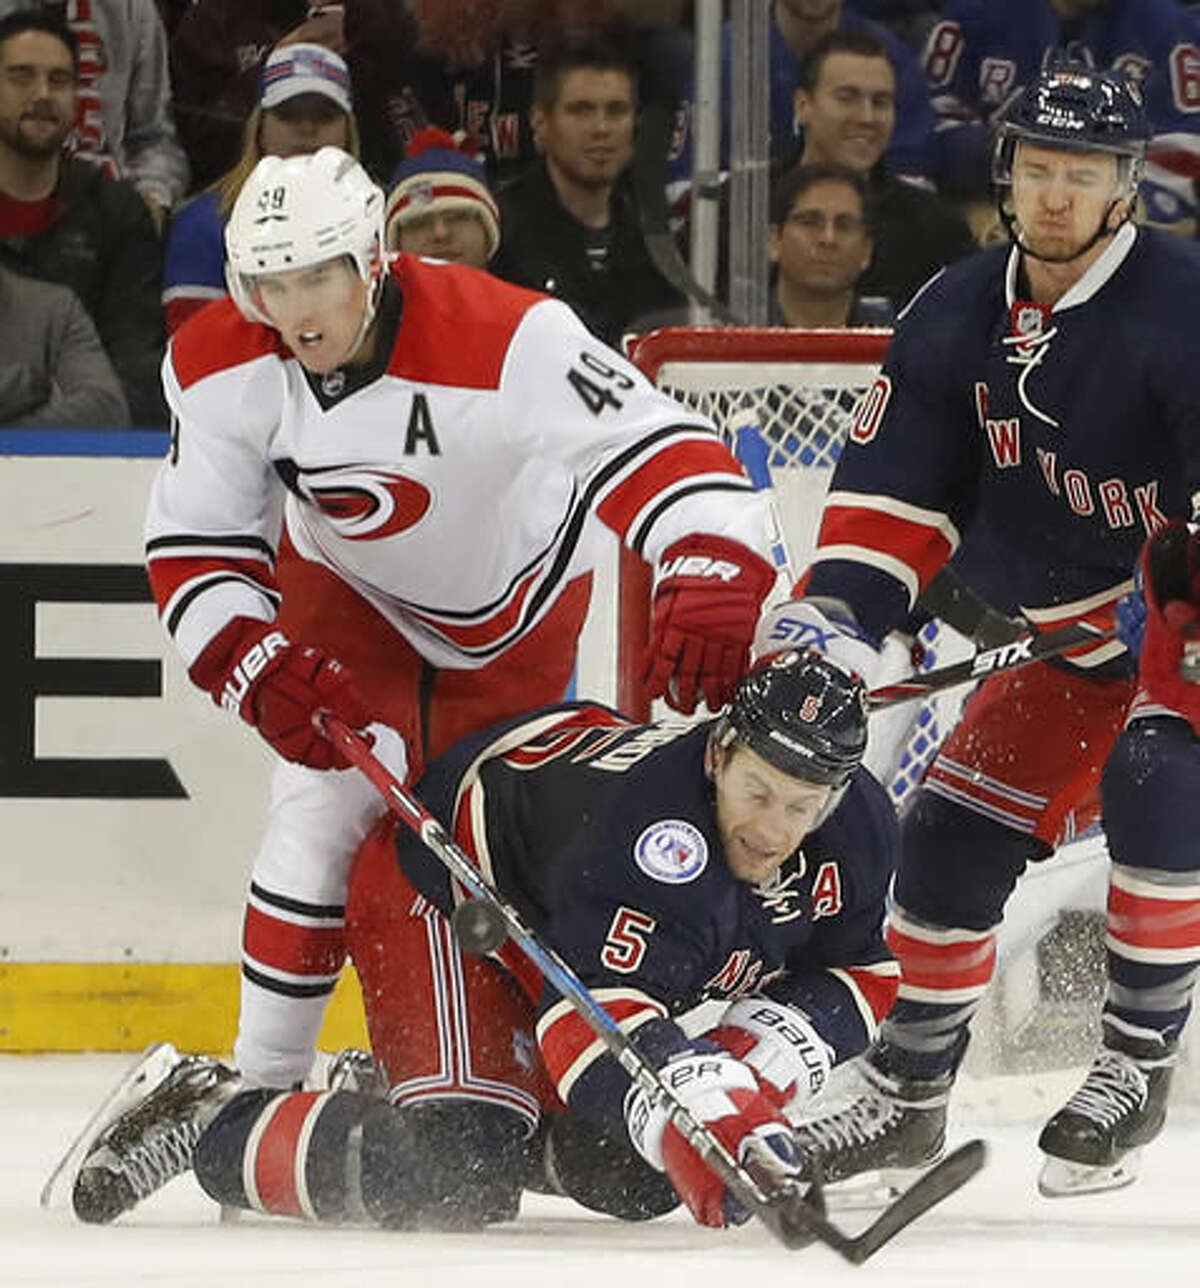 New York Rangers defenseman Dan Girardi (5) hits the ice as he vies for control of the puck against Carolina Hurricanes center Victor Rask (49) during the second period of an NHL hockey game, Saturday, Dec. 3, 2016, in New York. (AP Photo/Julie Jacobson)